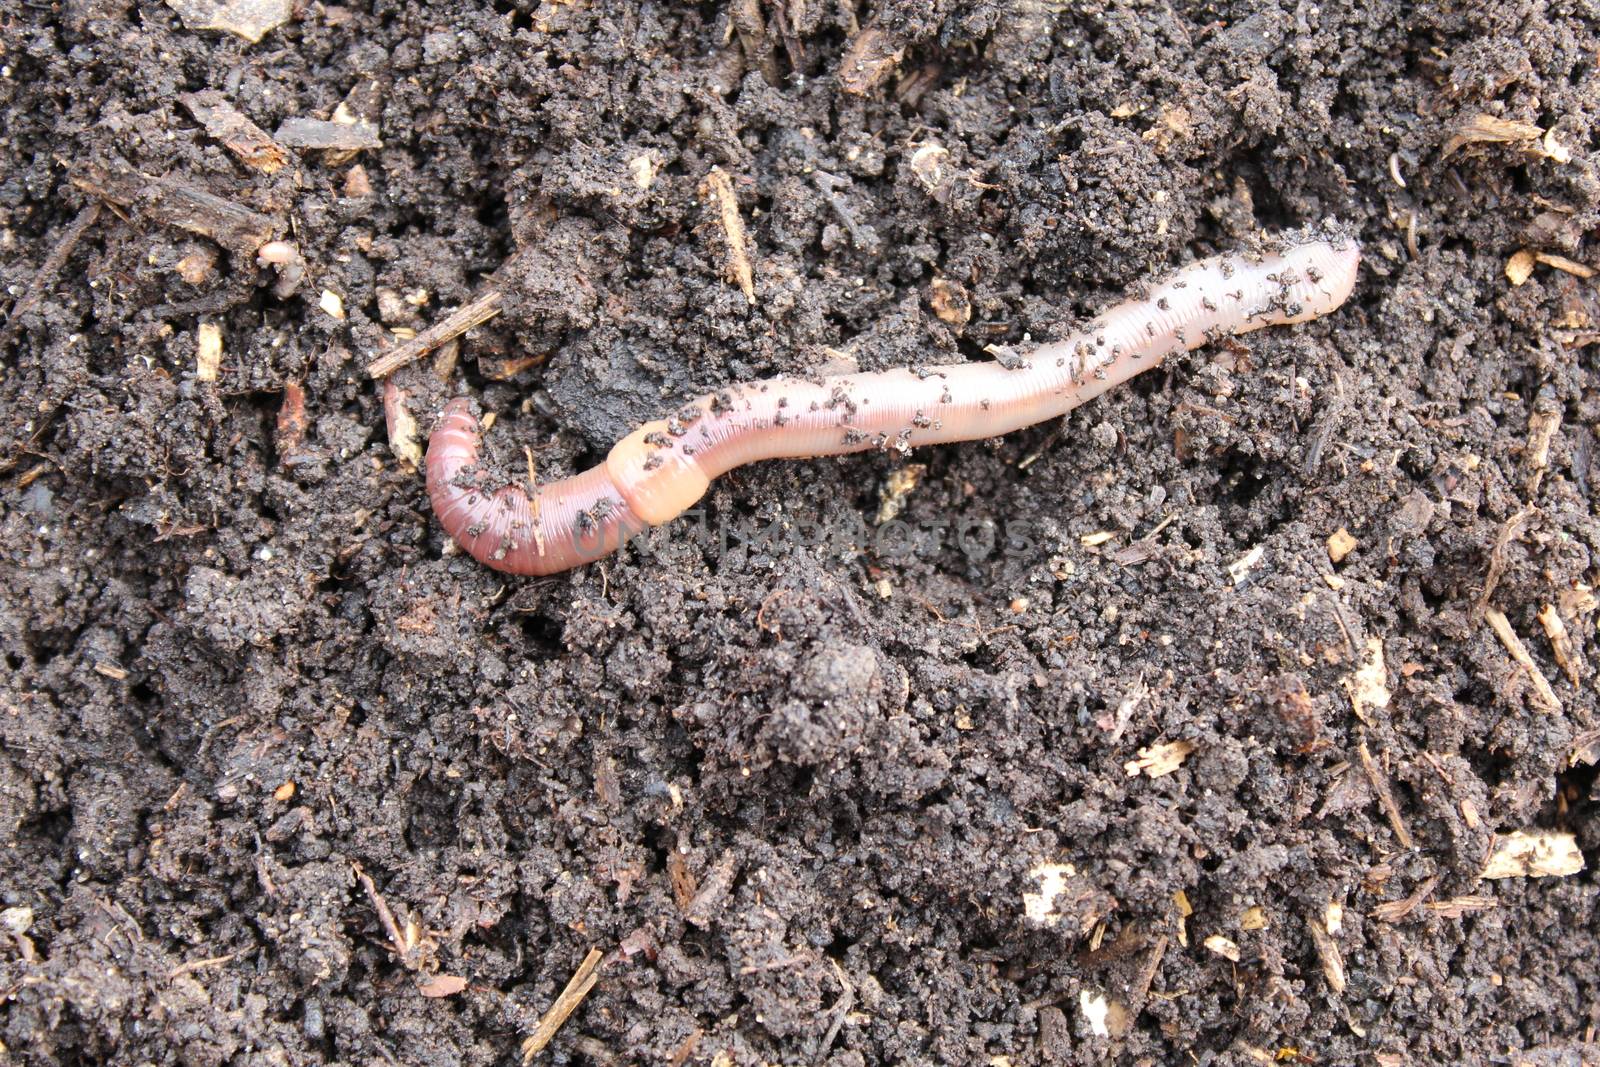 The picture shows worm in the compost.